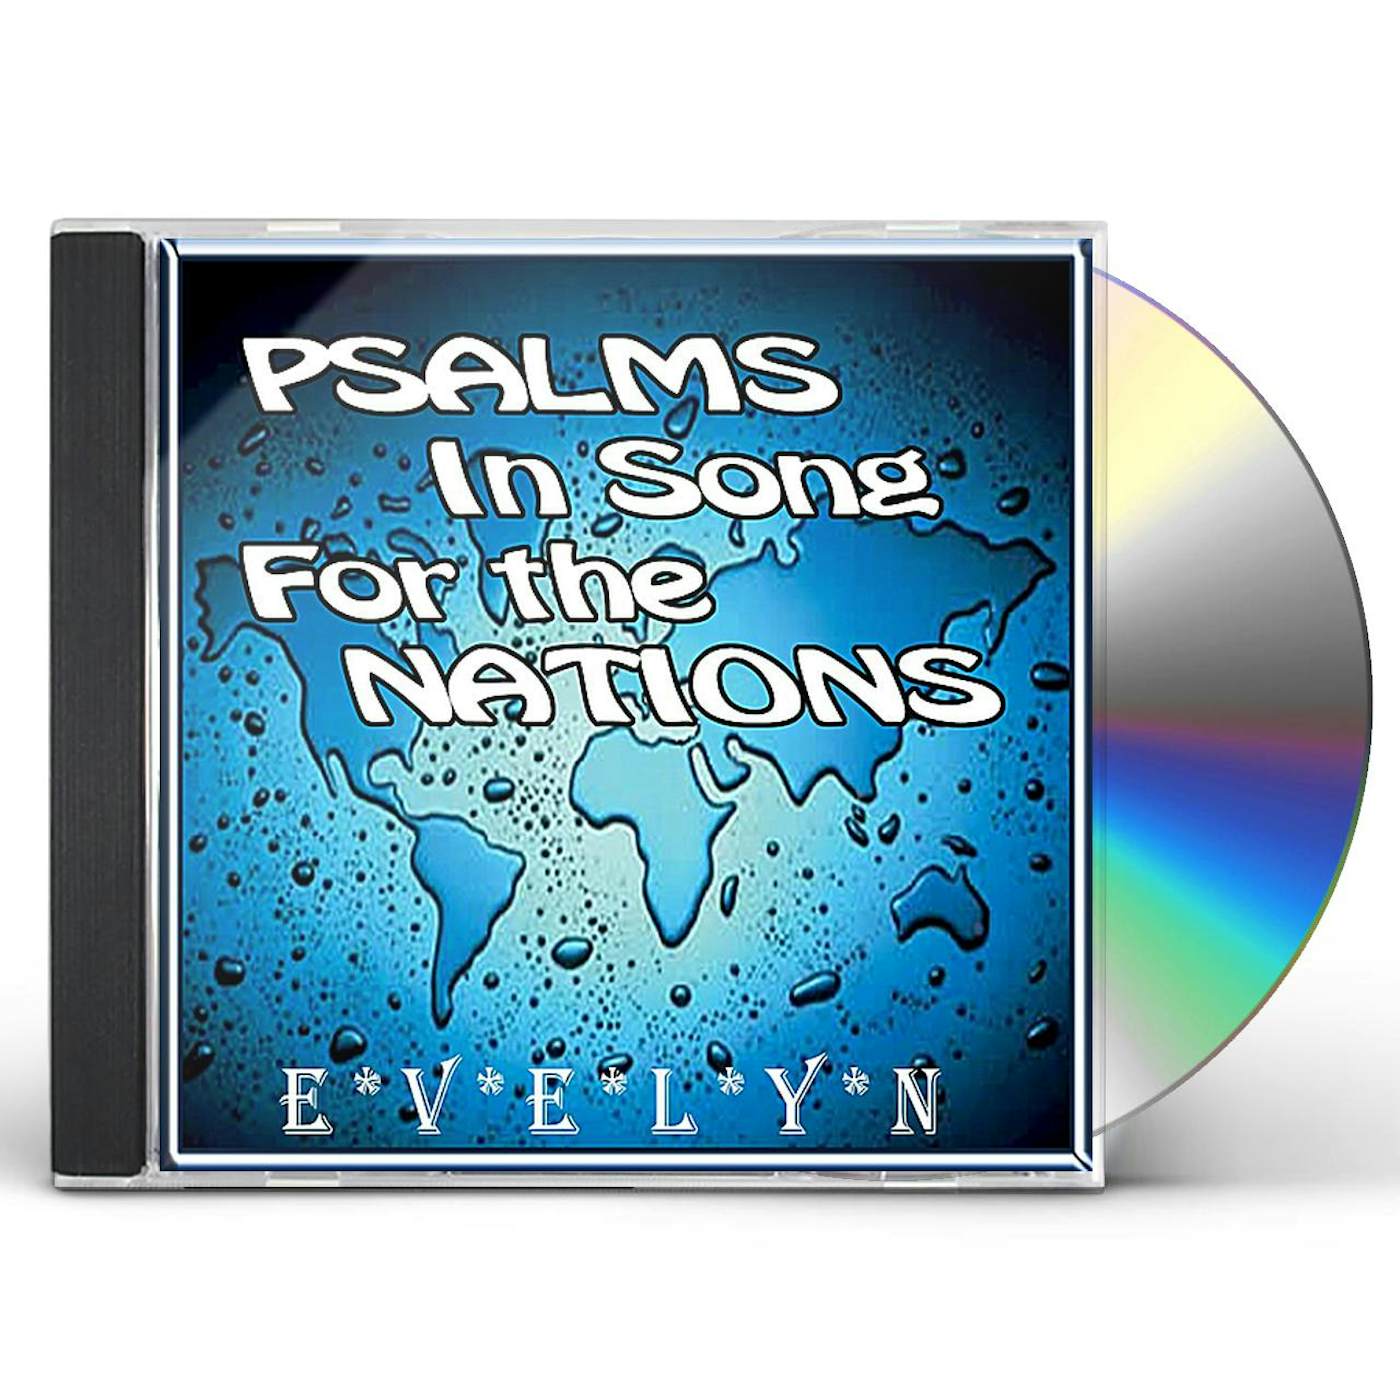 Evelyn PSALMS IN SONG FOR THE NATIONS CD